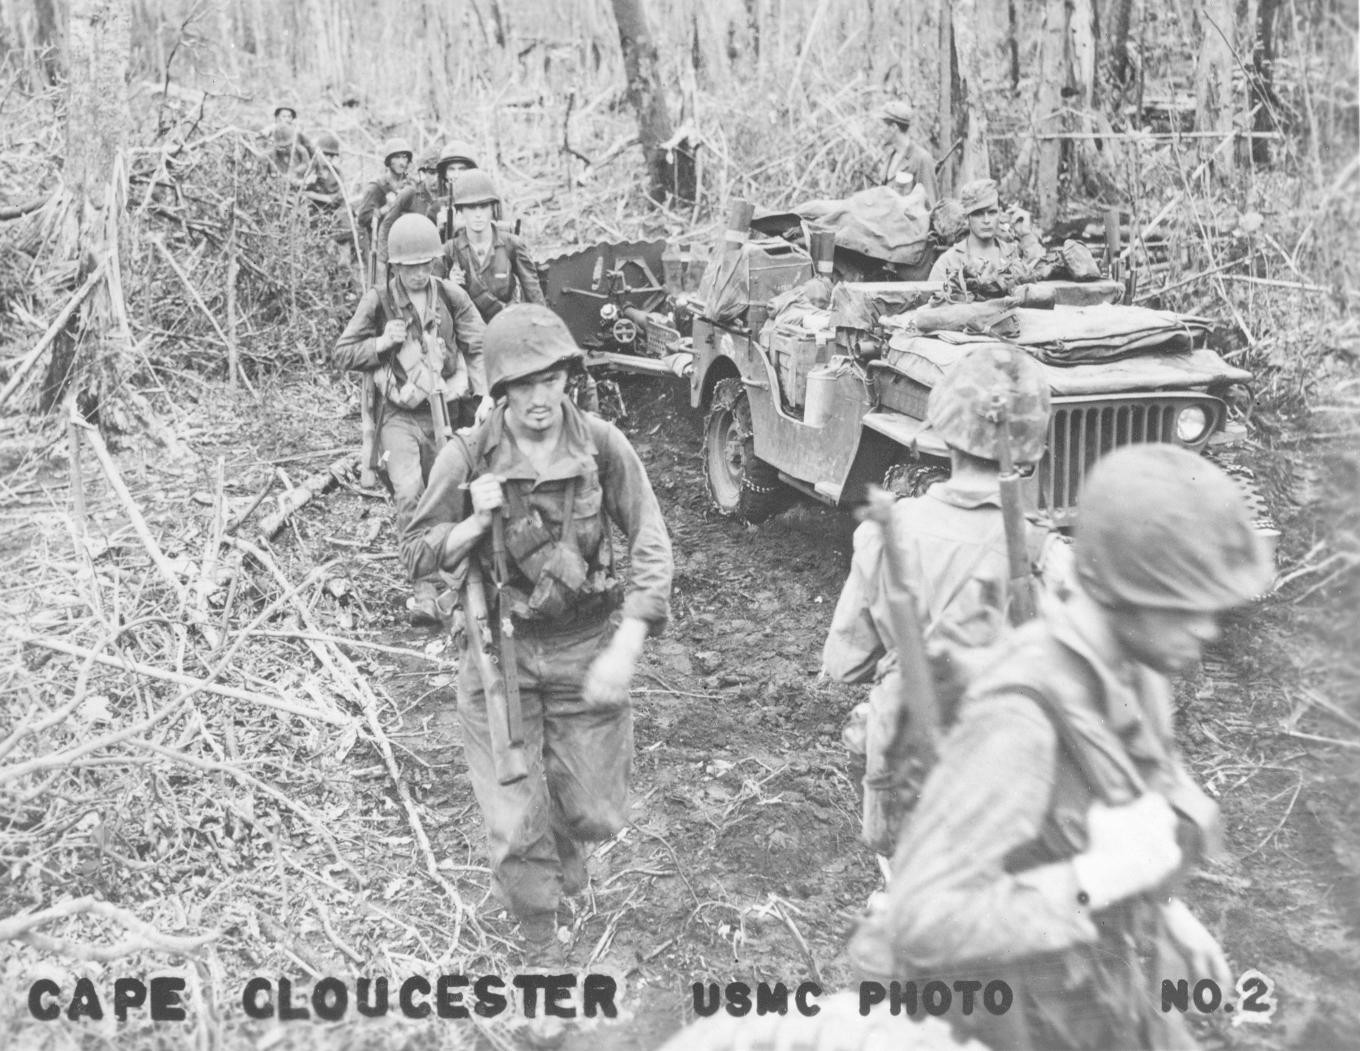 Men of the US First Marines Division at Cape Gloucester, New Britain, Bismarck Archipelago, circa late Dec 1943; note jeep being used to haul supplies